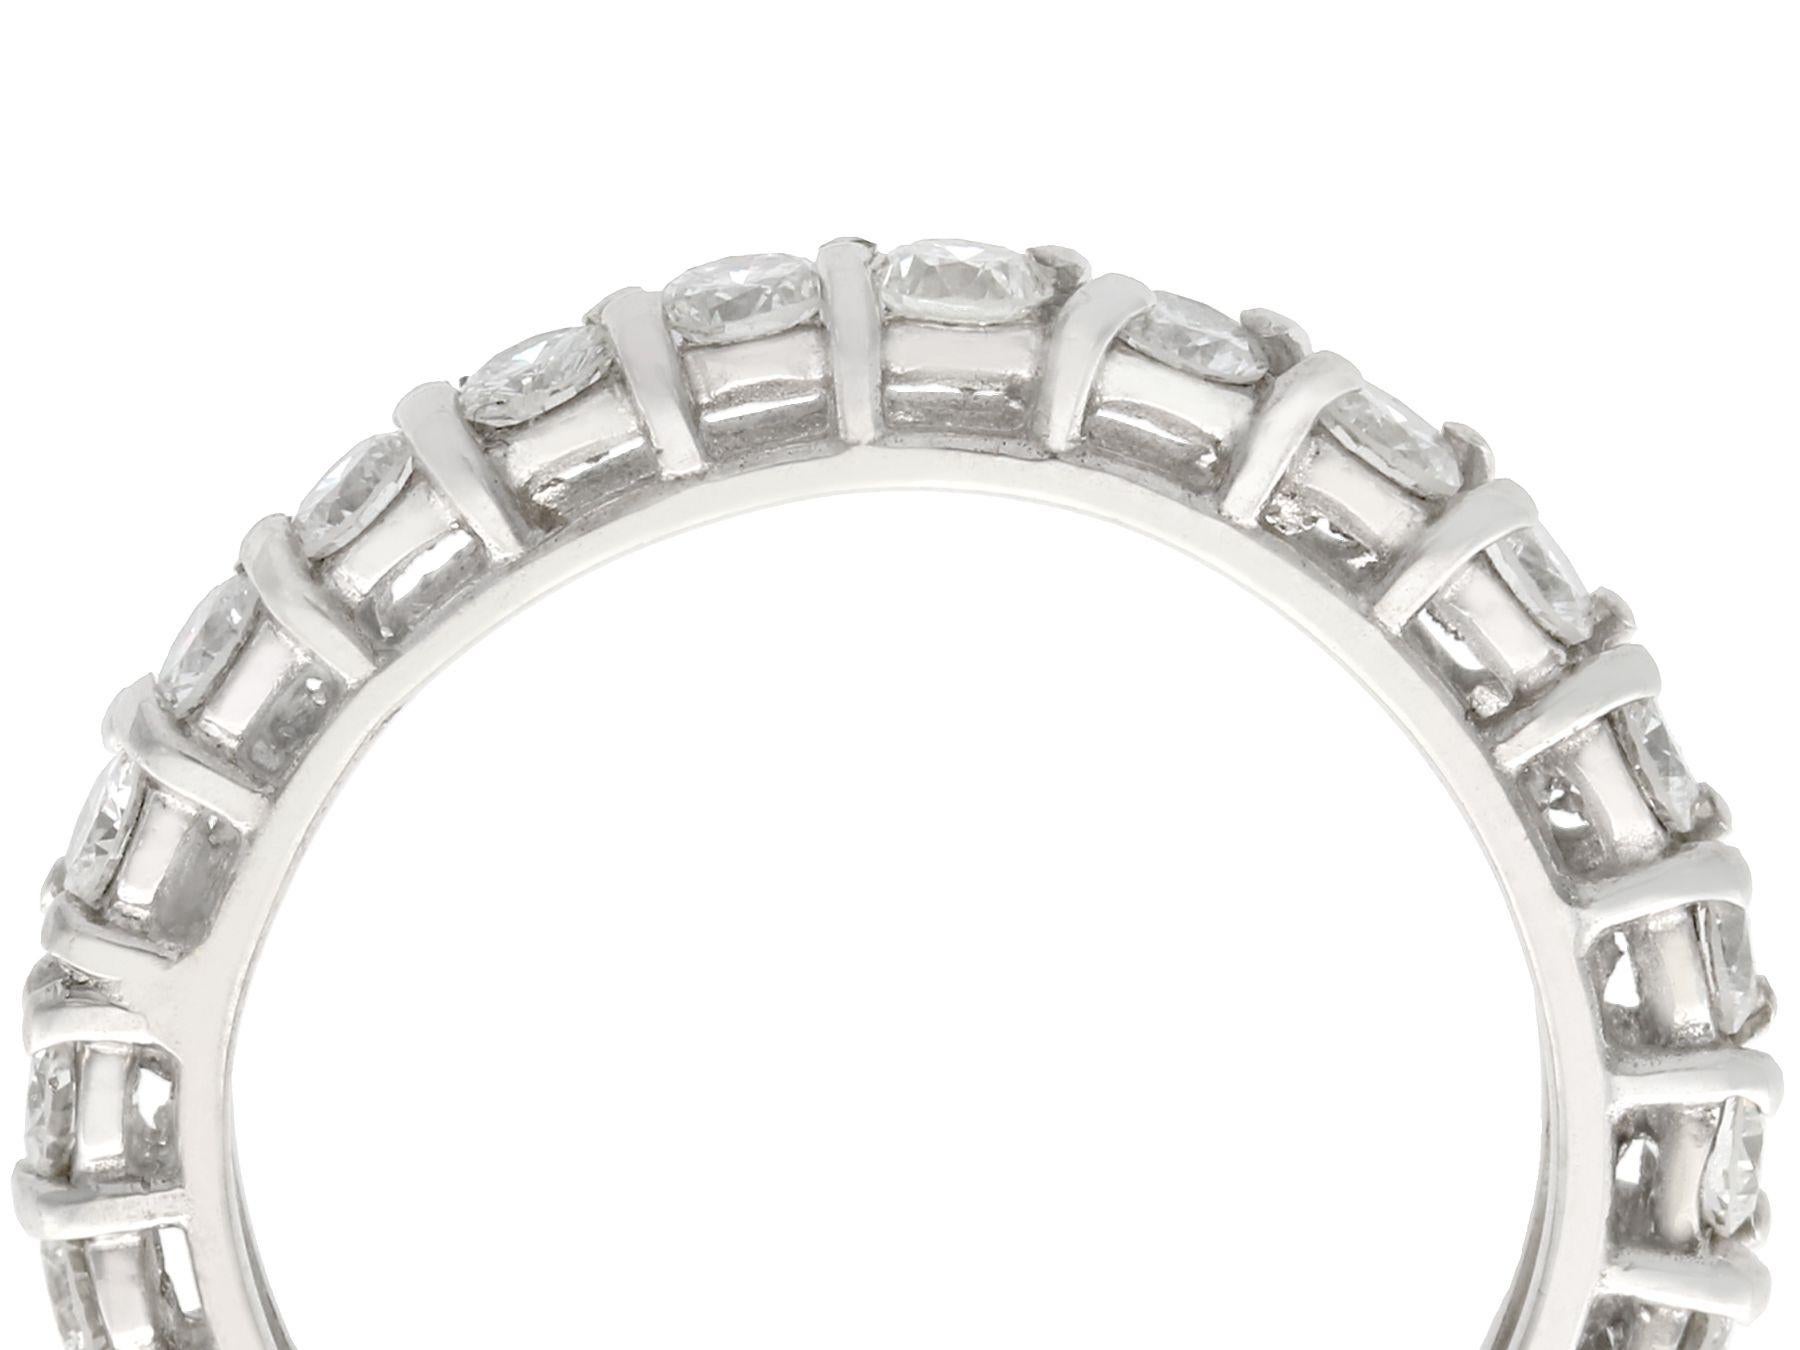 A fine and impressive vintage 1.20 carat diamond, 18 karat white gold full eternity ring; part of our vintage jewelry/estate jewelry collections

This impressive vintage full eternity diamond ring has been crafted in 18k white gold.

The pierced